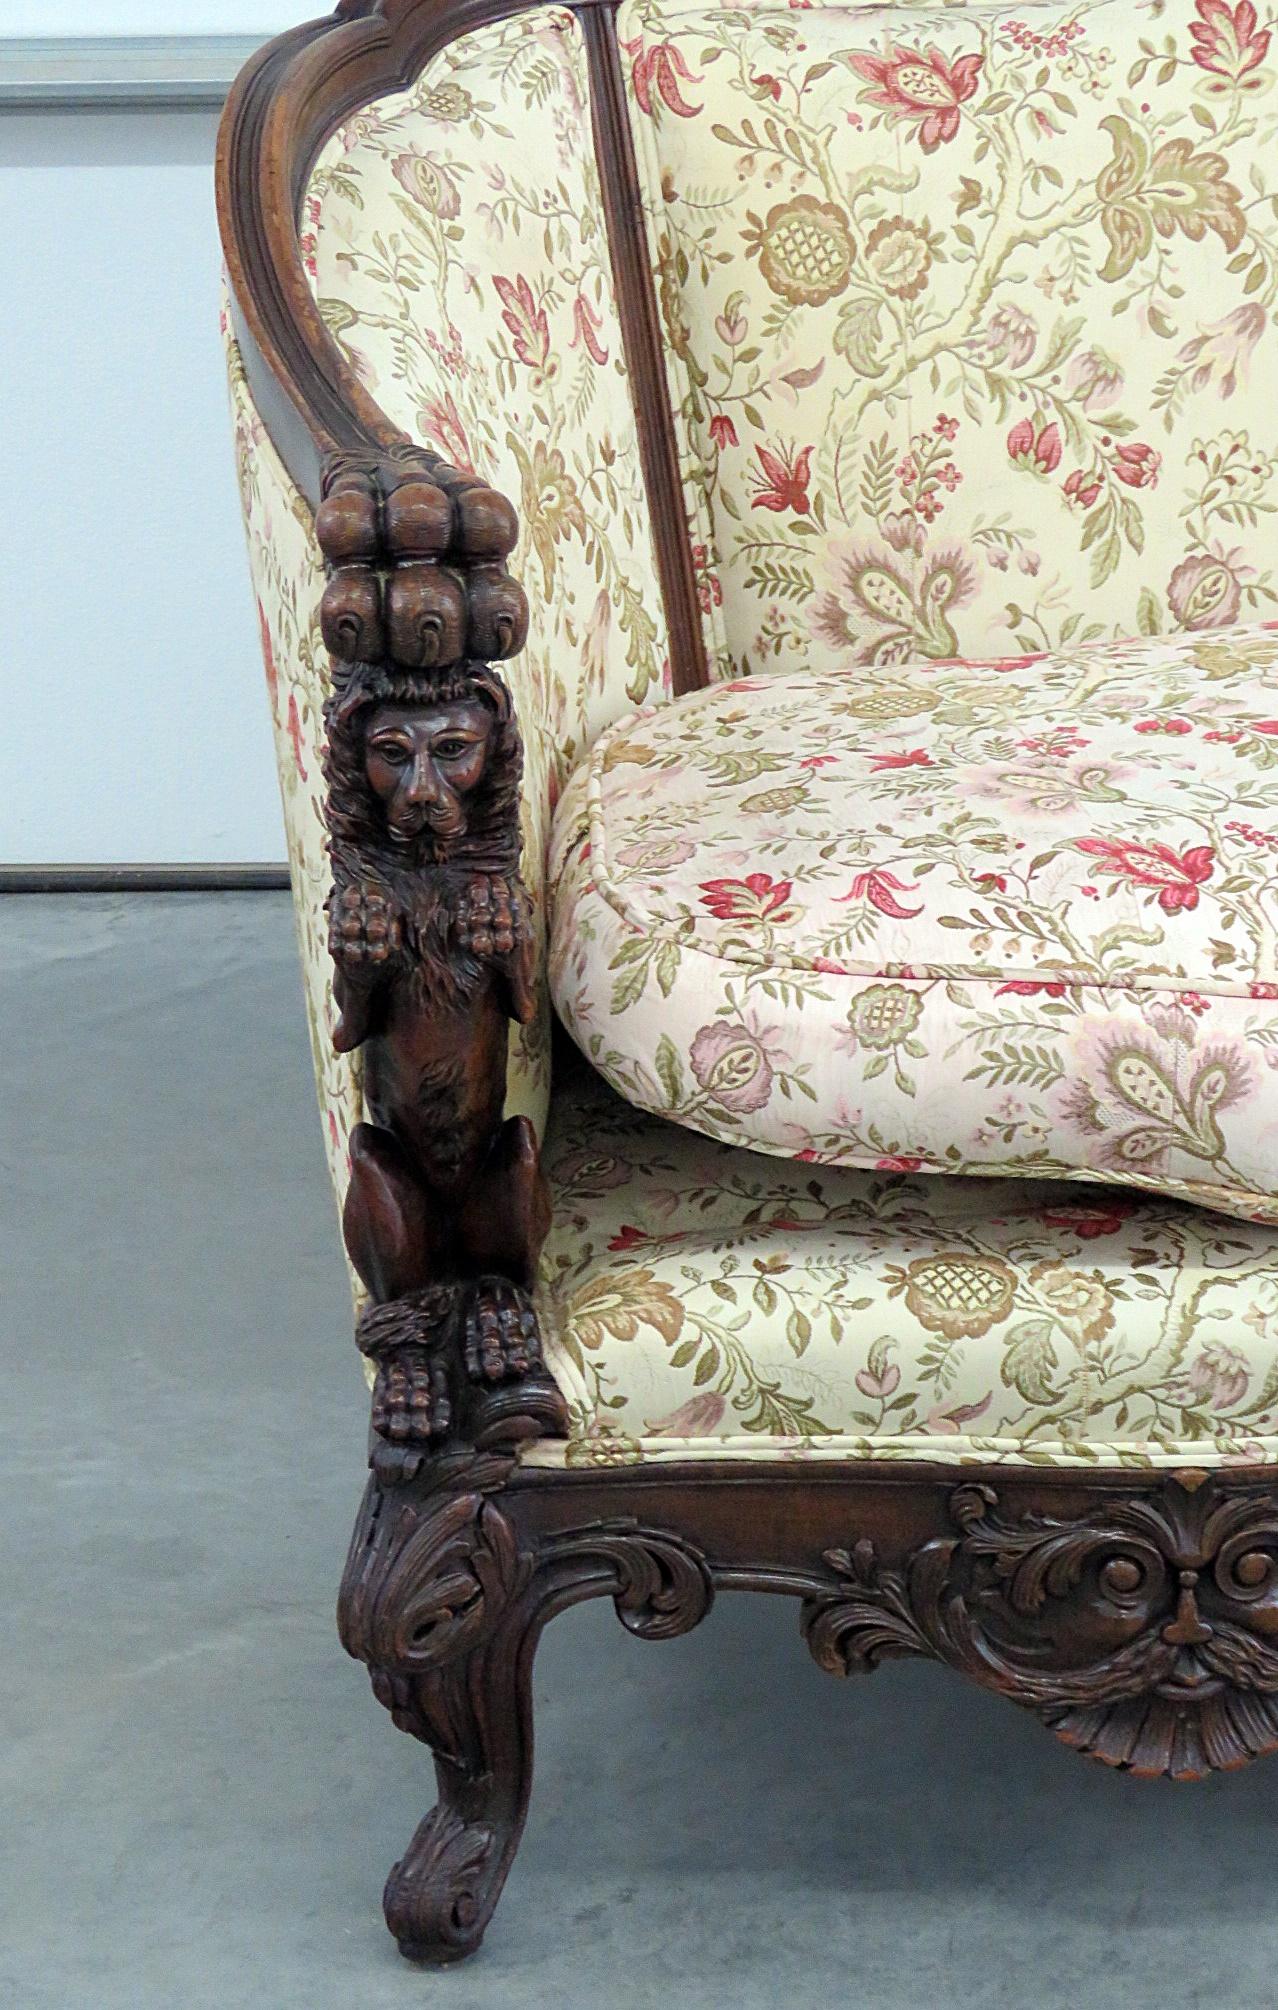 This is a wonderful sofa. The carved walnut lion frame is quite rare and hard to find. This American-made antique dates to the 1920s era and is of the highest quality in terms of carving and detail. The upholstery is a second recovering and is a